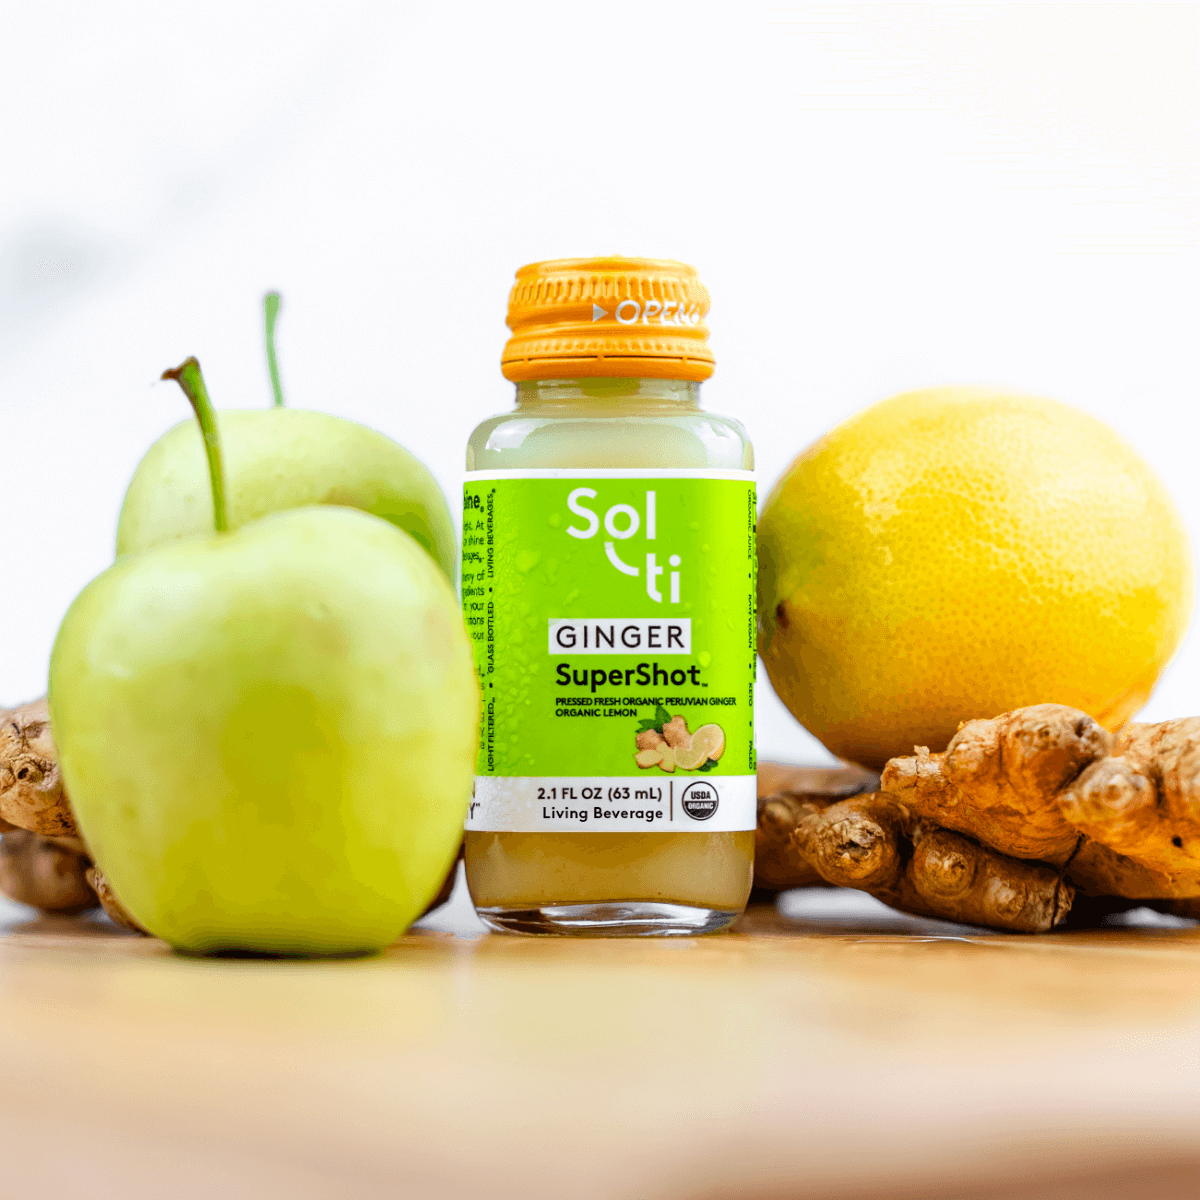 a bottle of GINGER SuperShot next to a lemon, ginger root and a apple